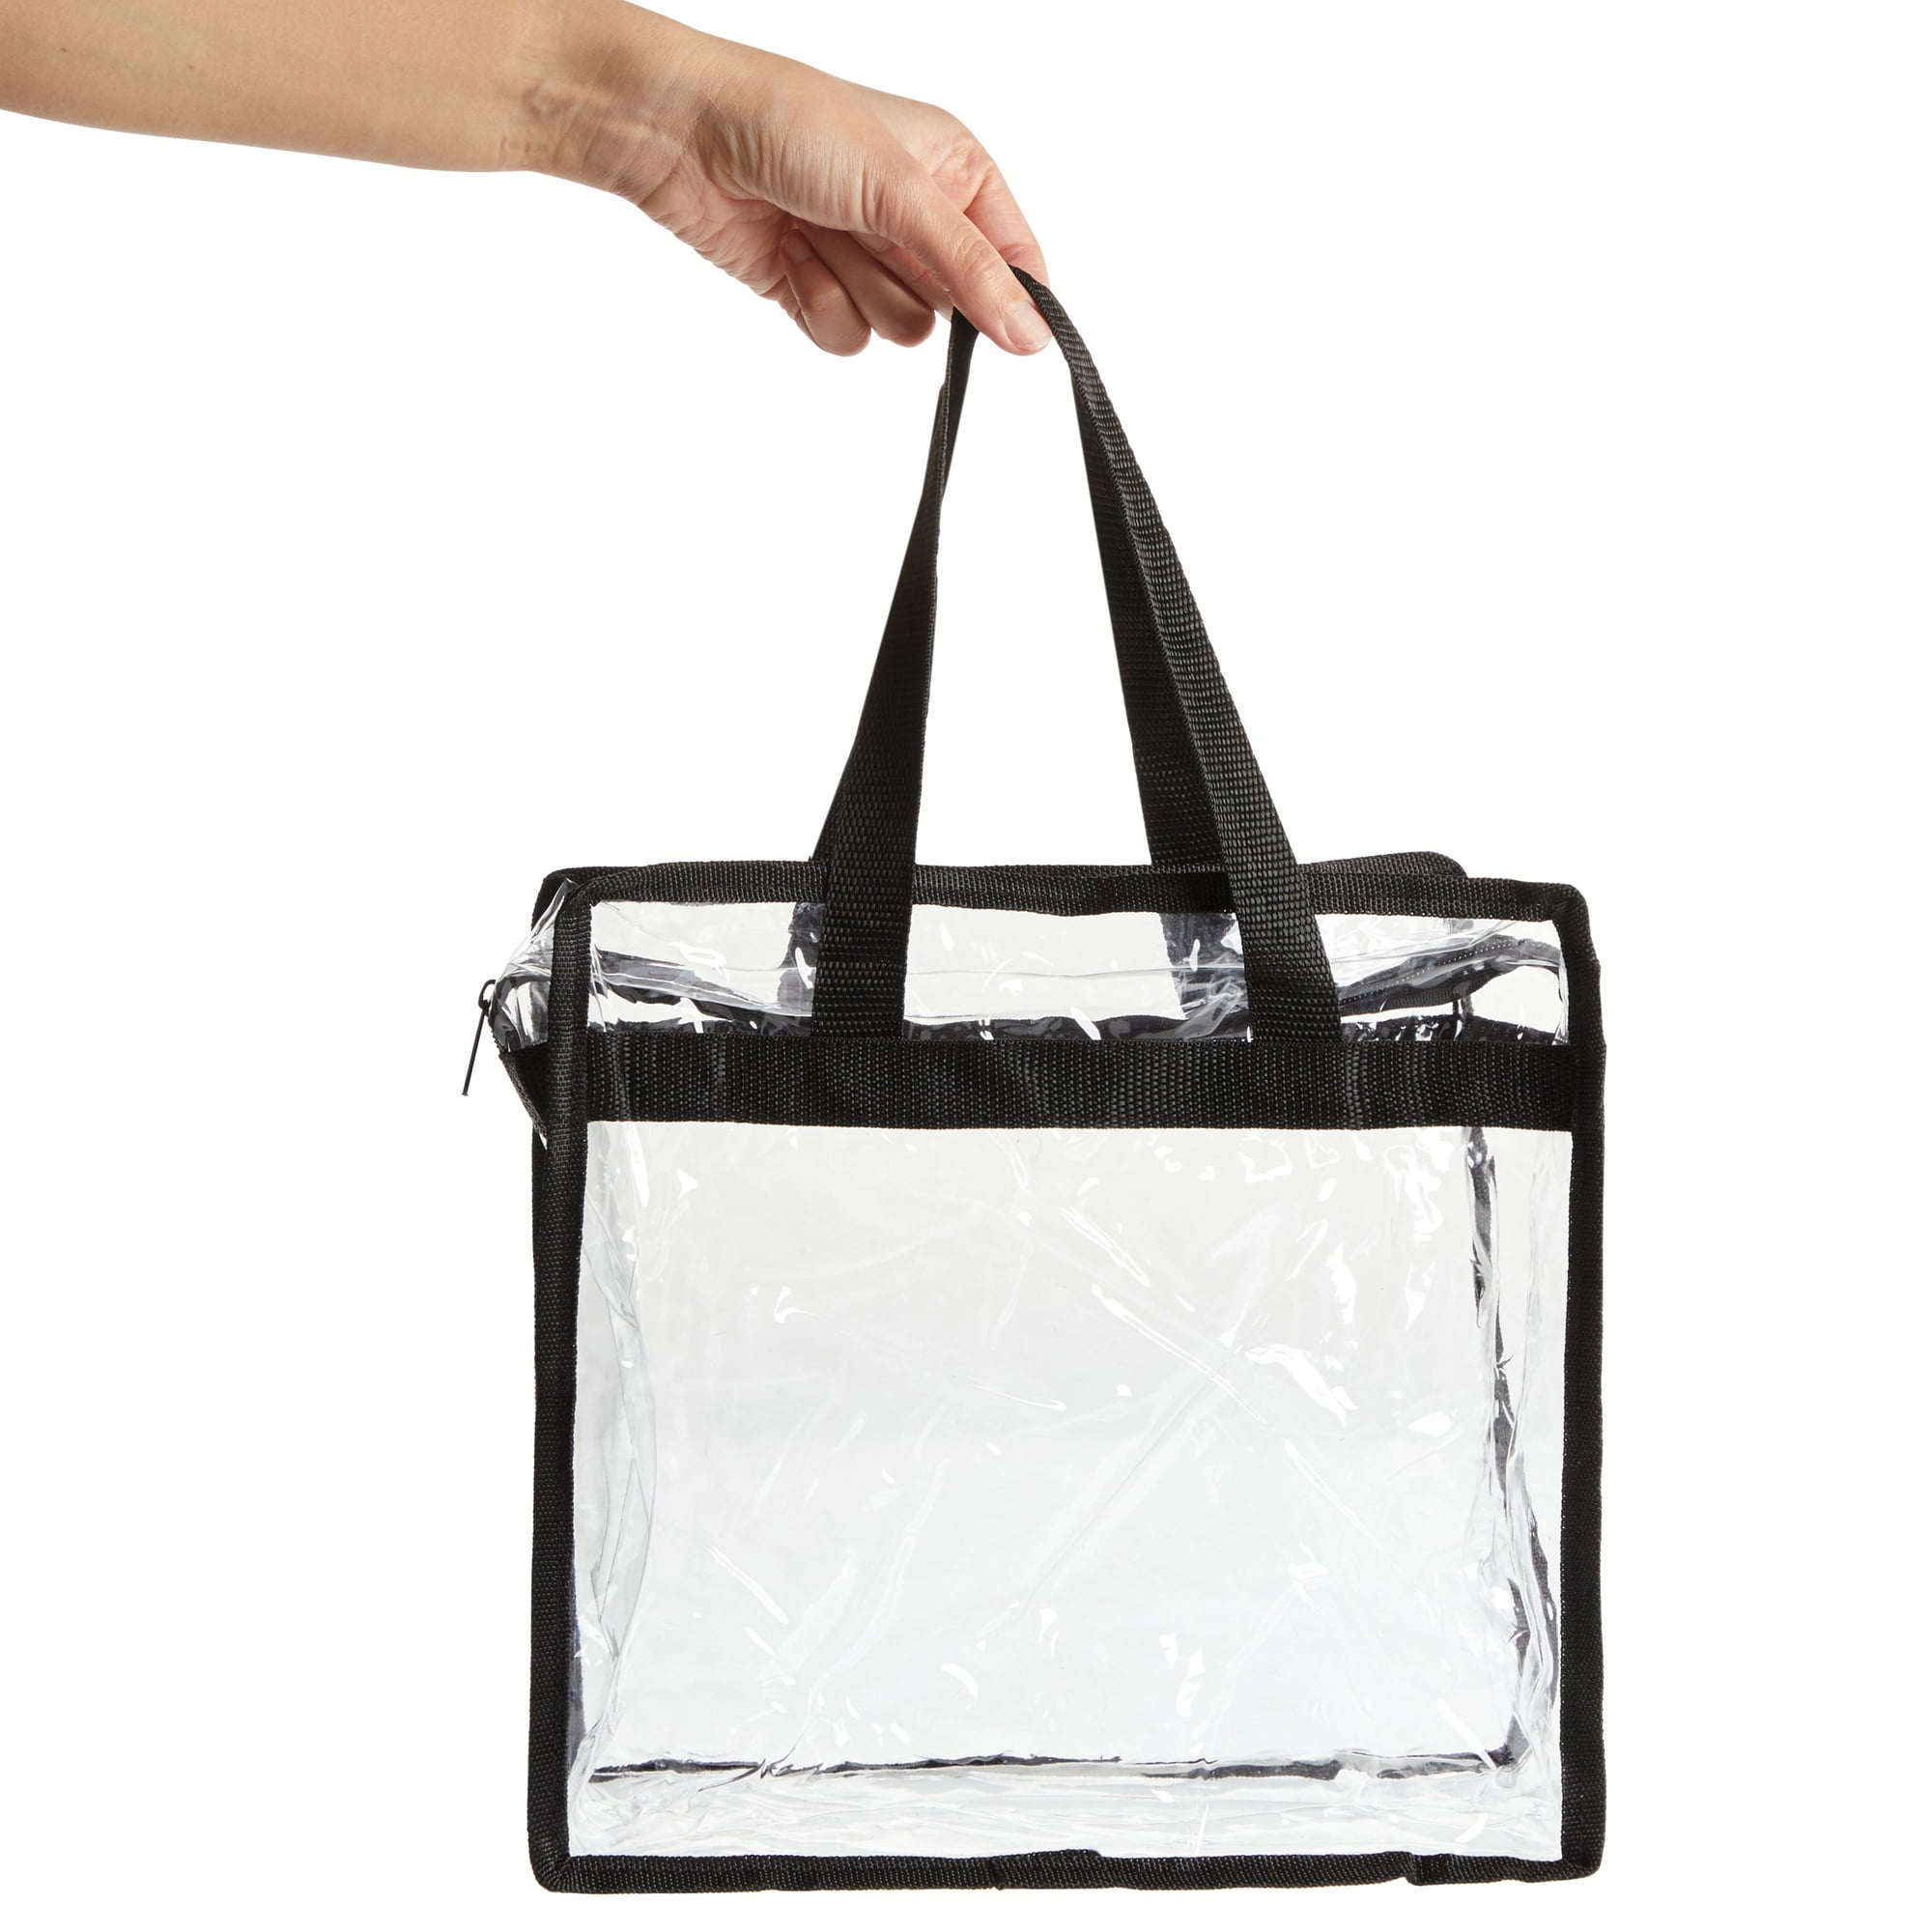  Sweetude 10 Pcs Clear Tote Bag Stadium Approved 12x12x6 Inches  Transparent Plastic Tote Bag See Through Clear Beach Bag with Handles for  Women Sports Games Work Travel Gym Concerts School, Candy